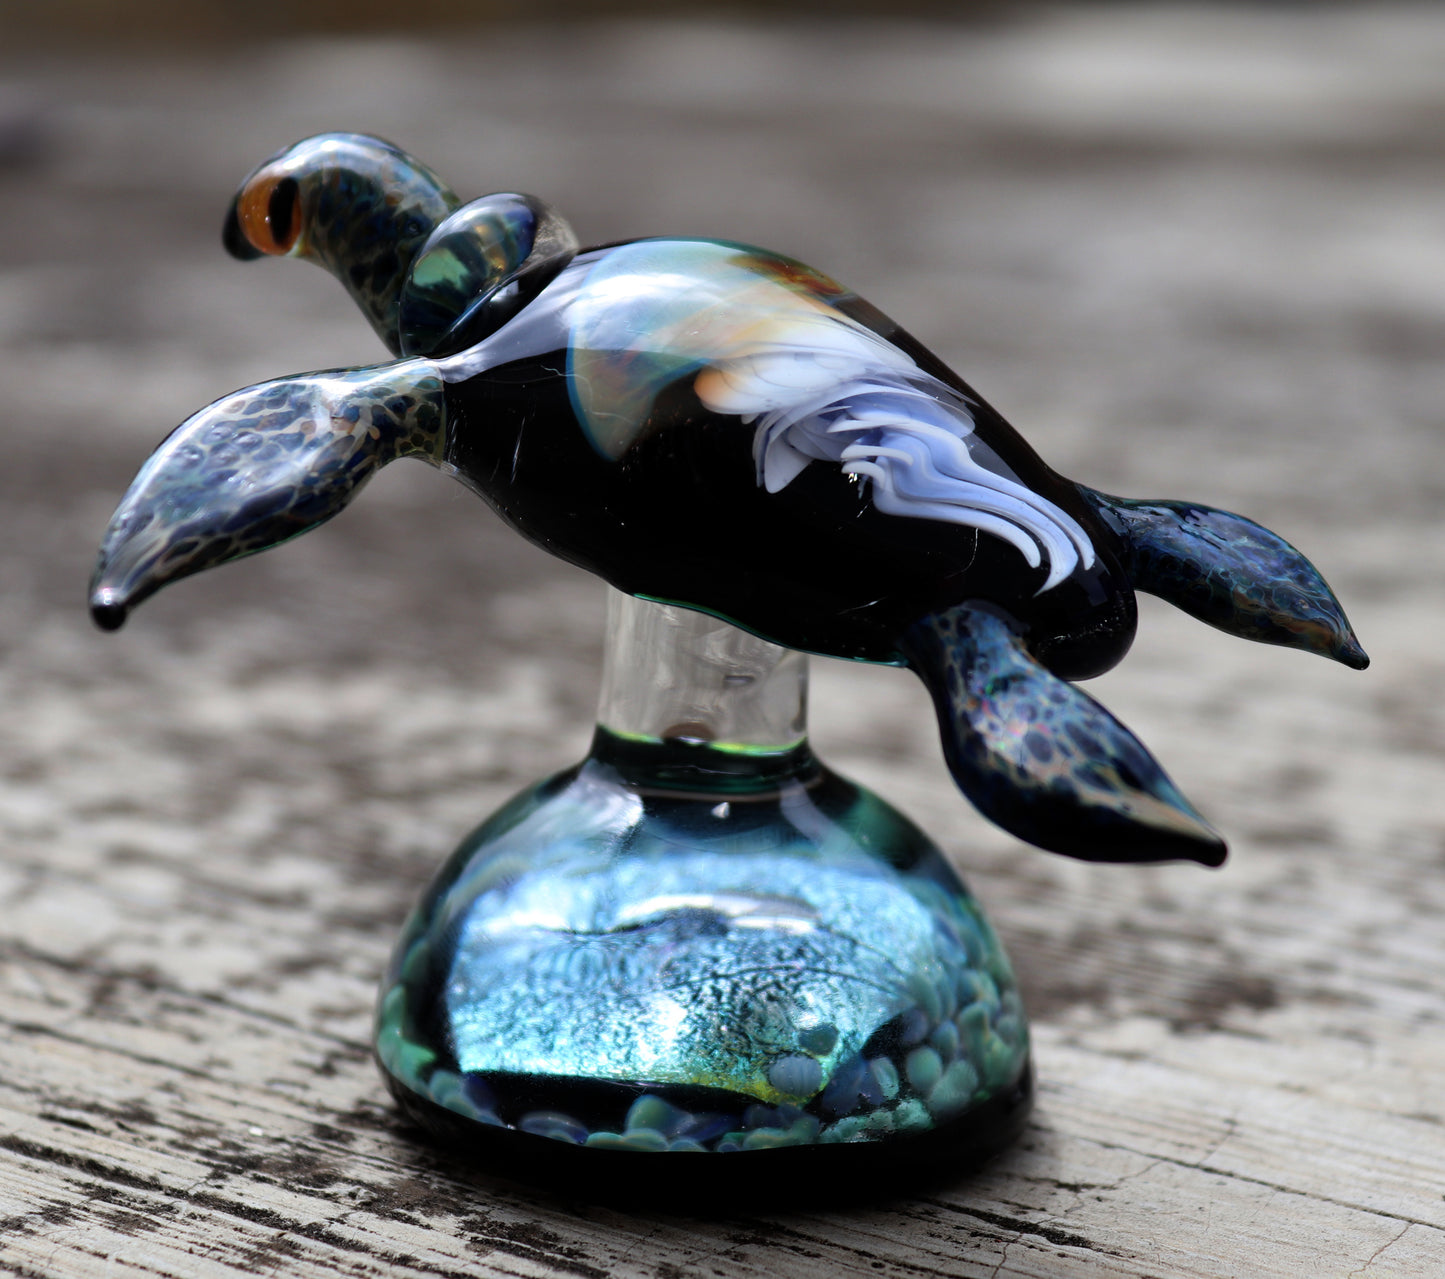 Unique Sea Turtle Sculpture with Opal Colored Jellyfish Inside.